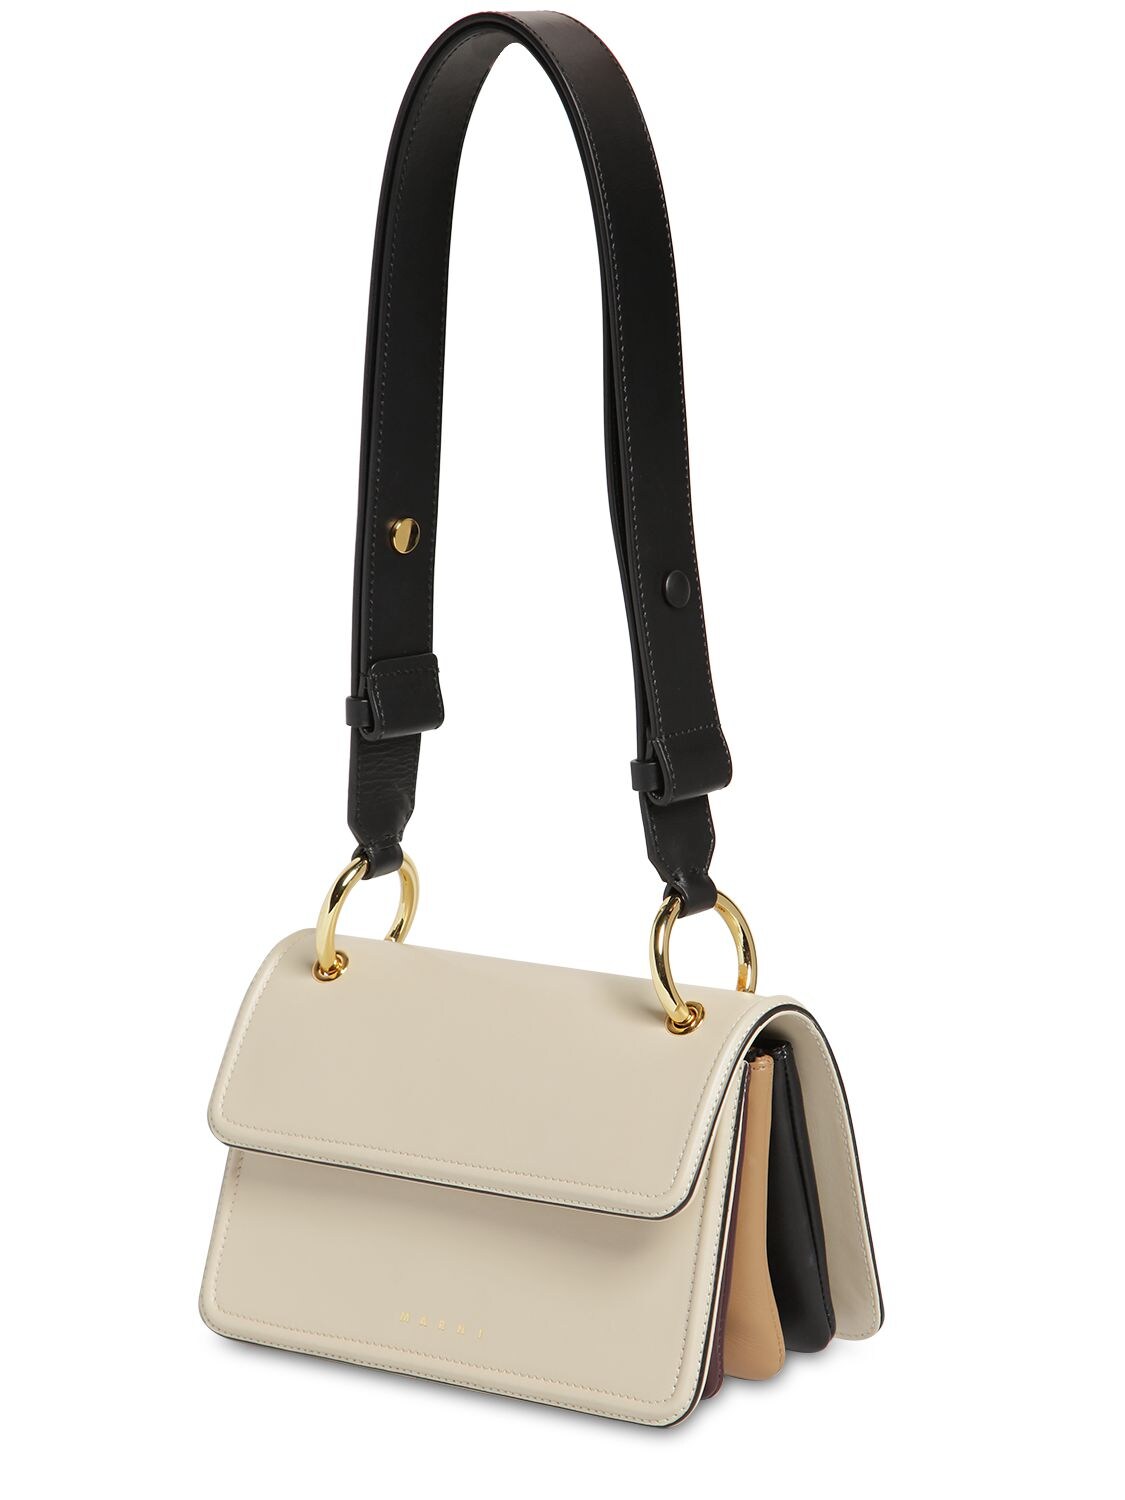 MARNI SMALL BEAT LEATHER SHOULDER BAG,70IVW4013-WJJEMZG1